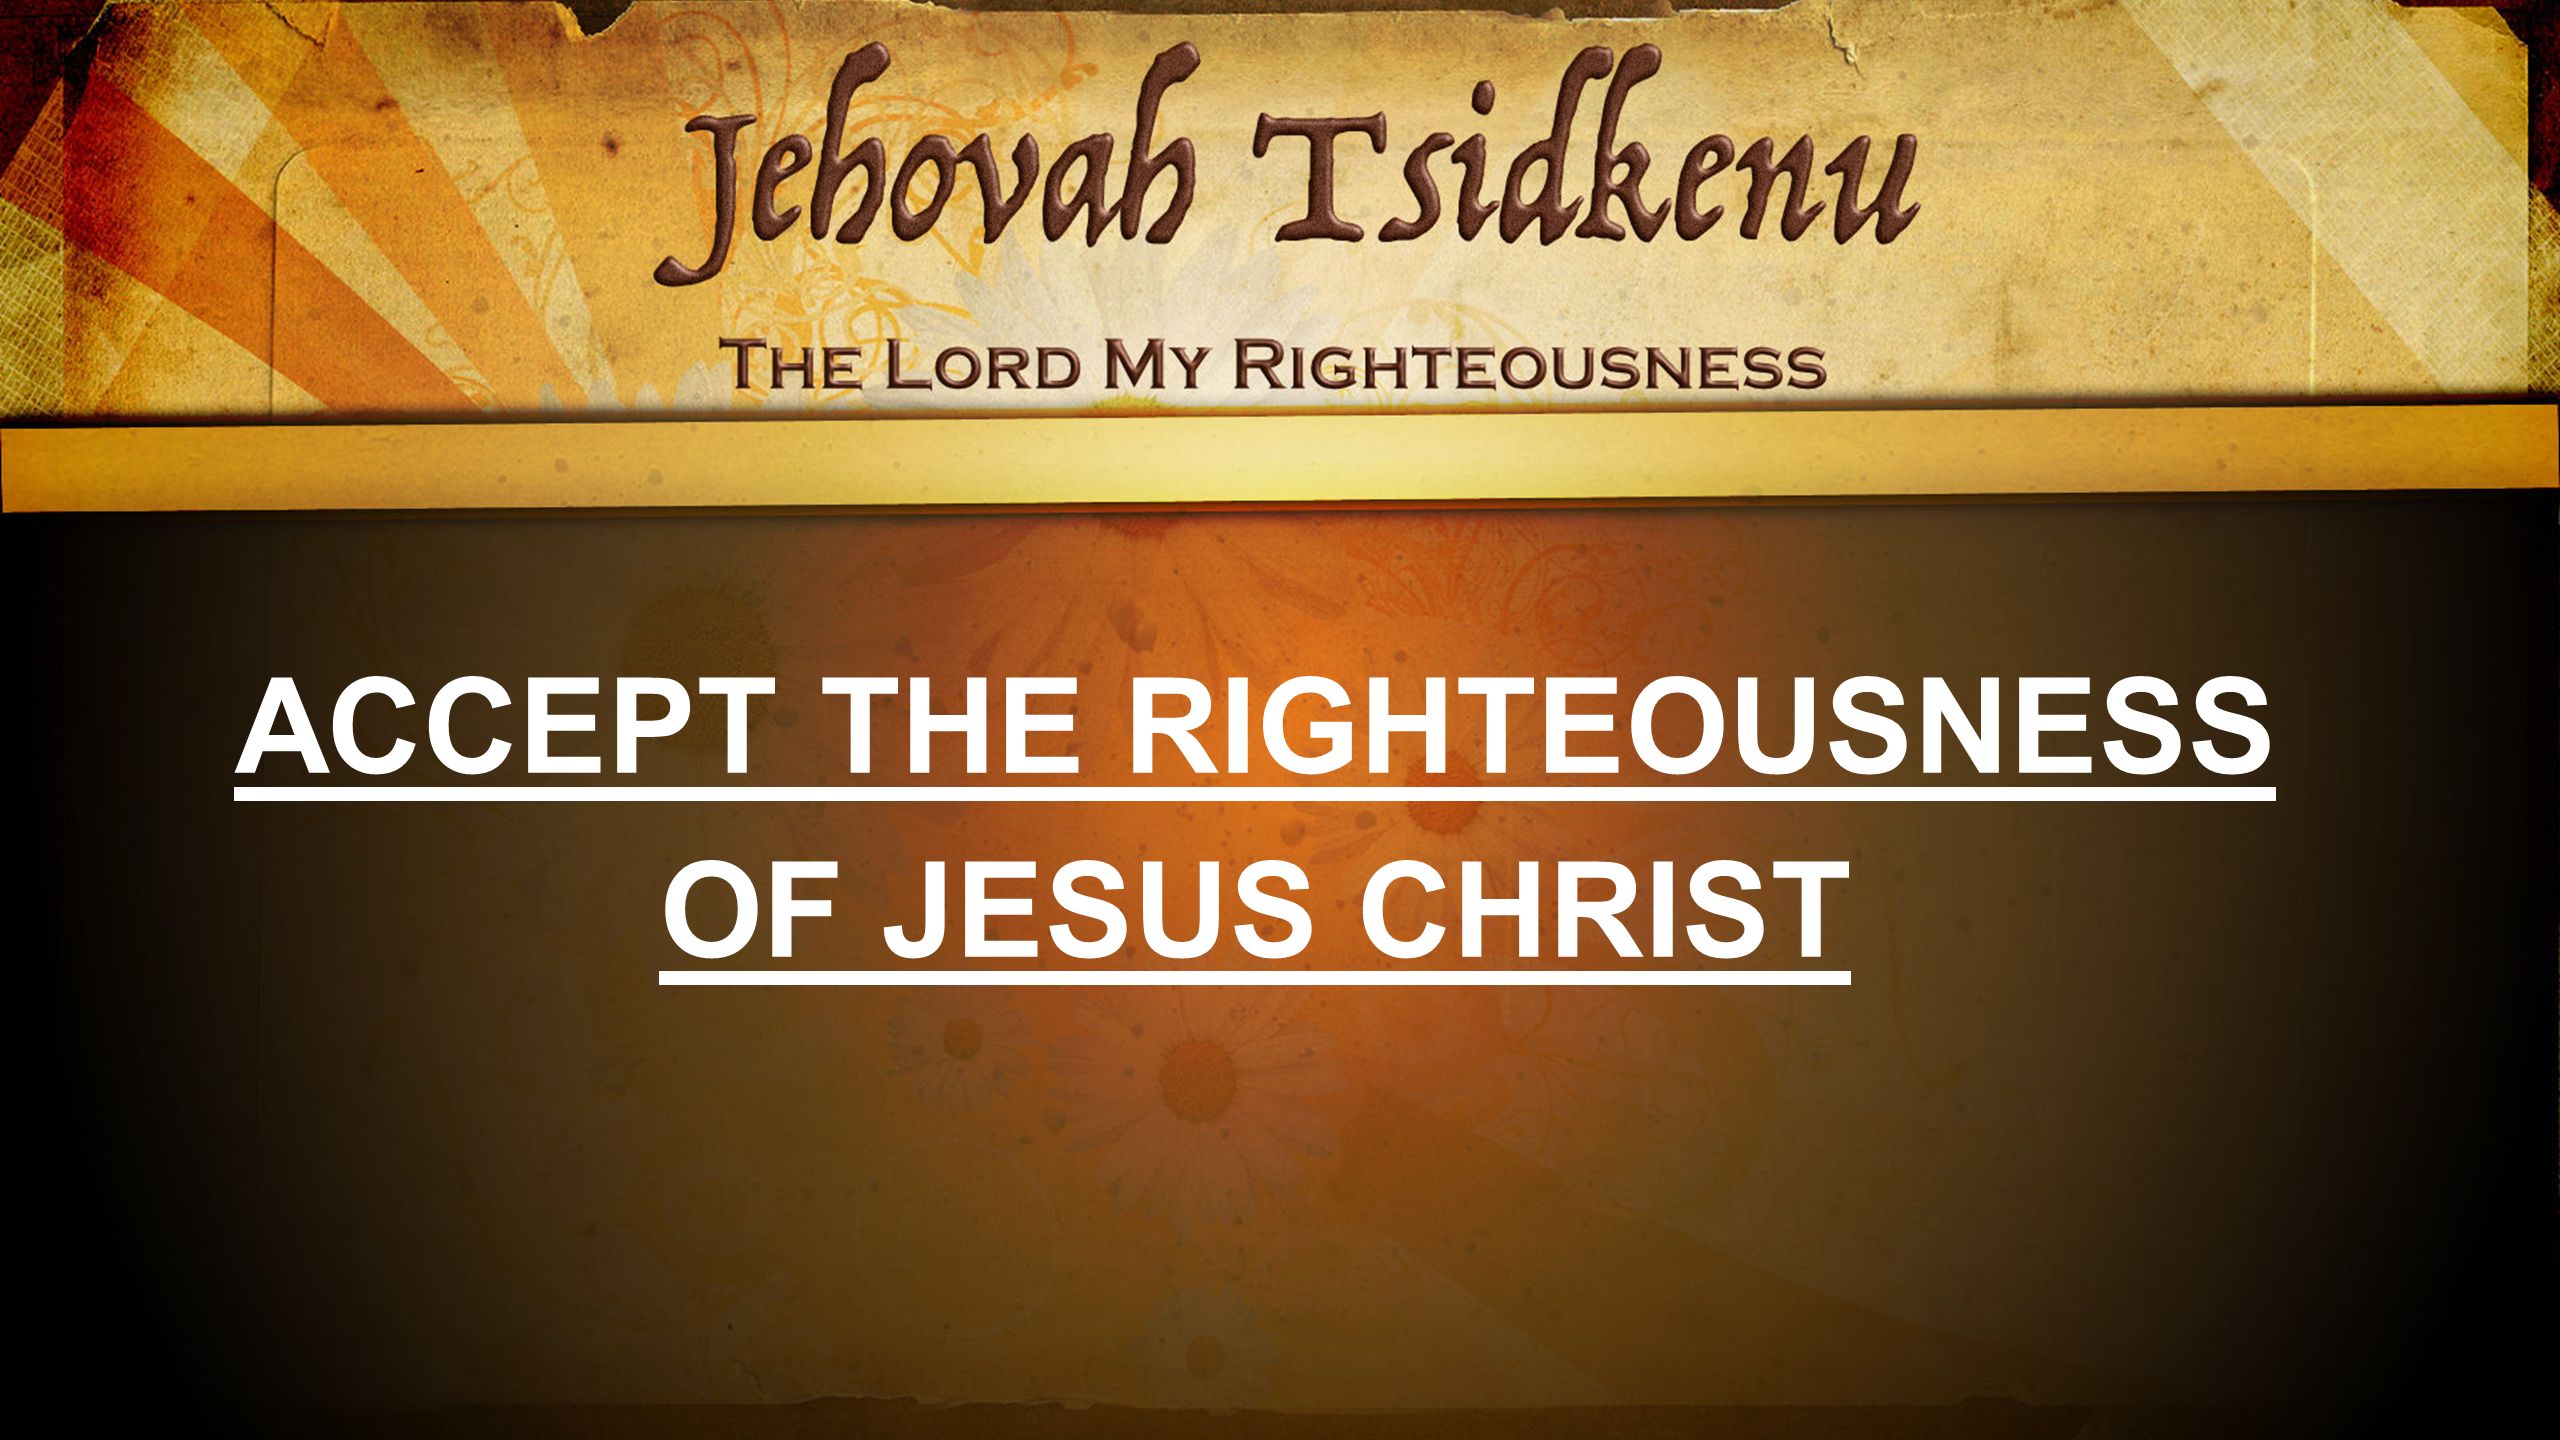 ACCEPT THE RIGHTEOUSNESS OF JESUS CHRIST